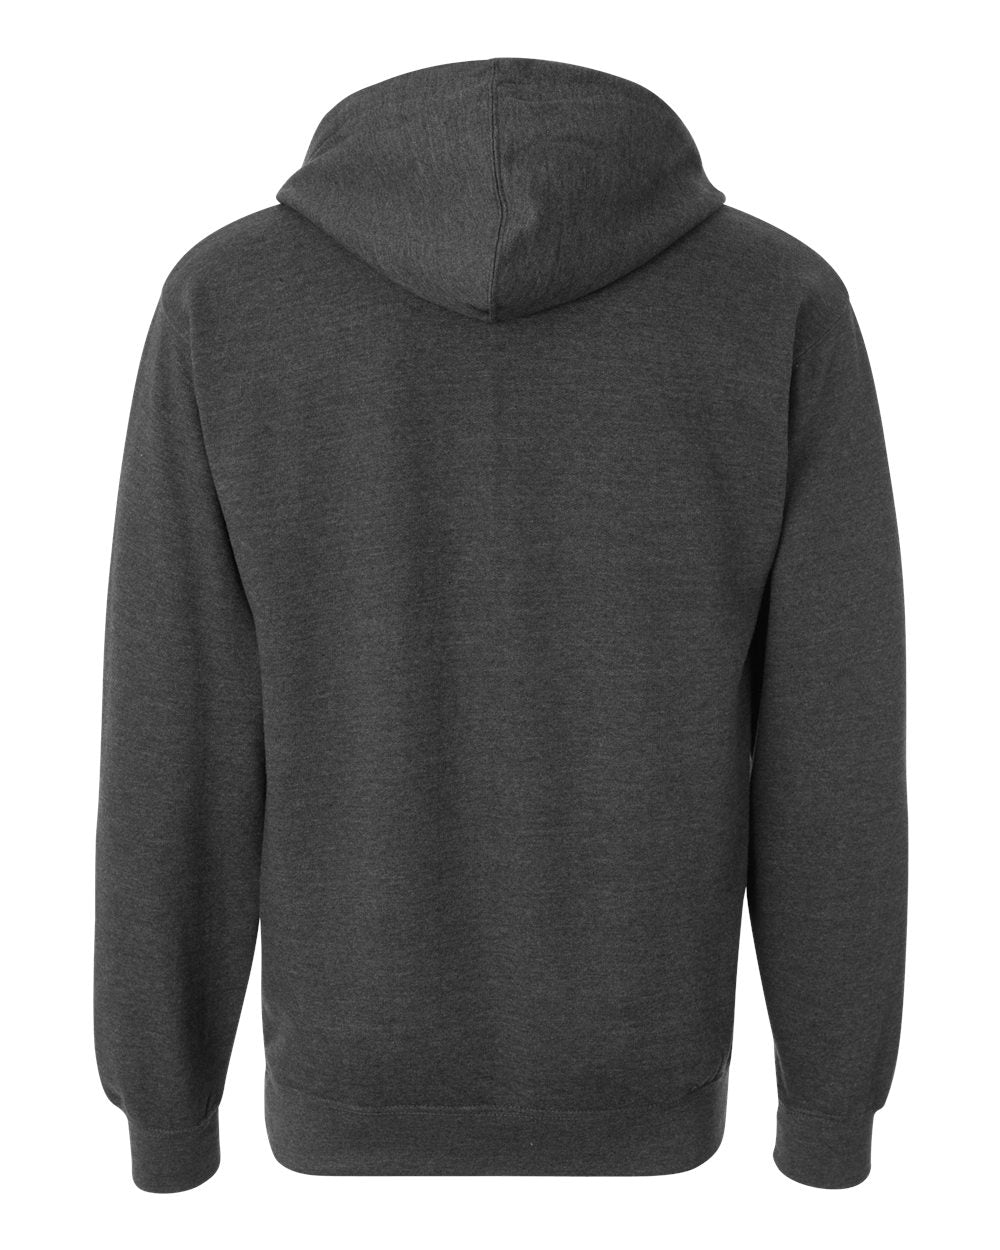 Independent Trading Co. Midweight Hooded Sweatshirt SS4500 #color_Charcoal Heather